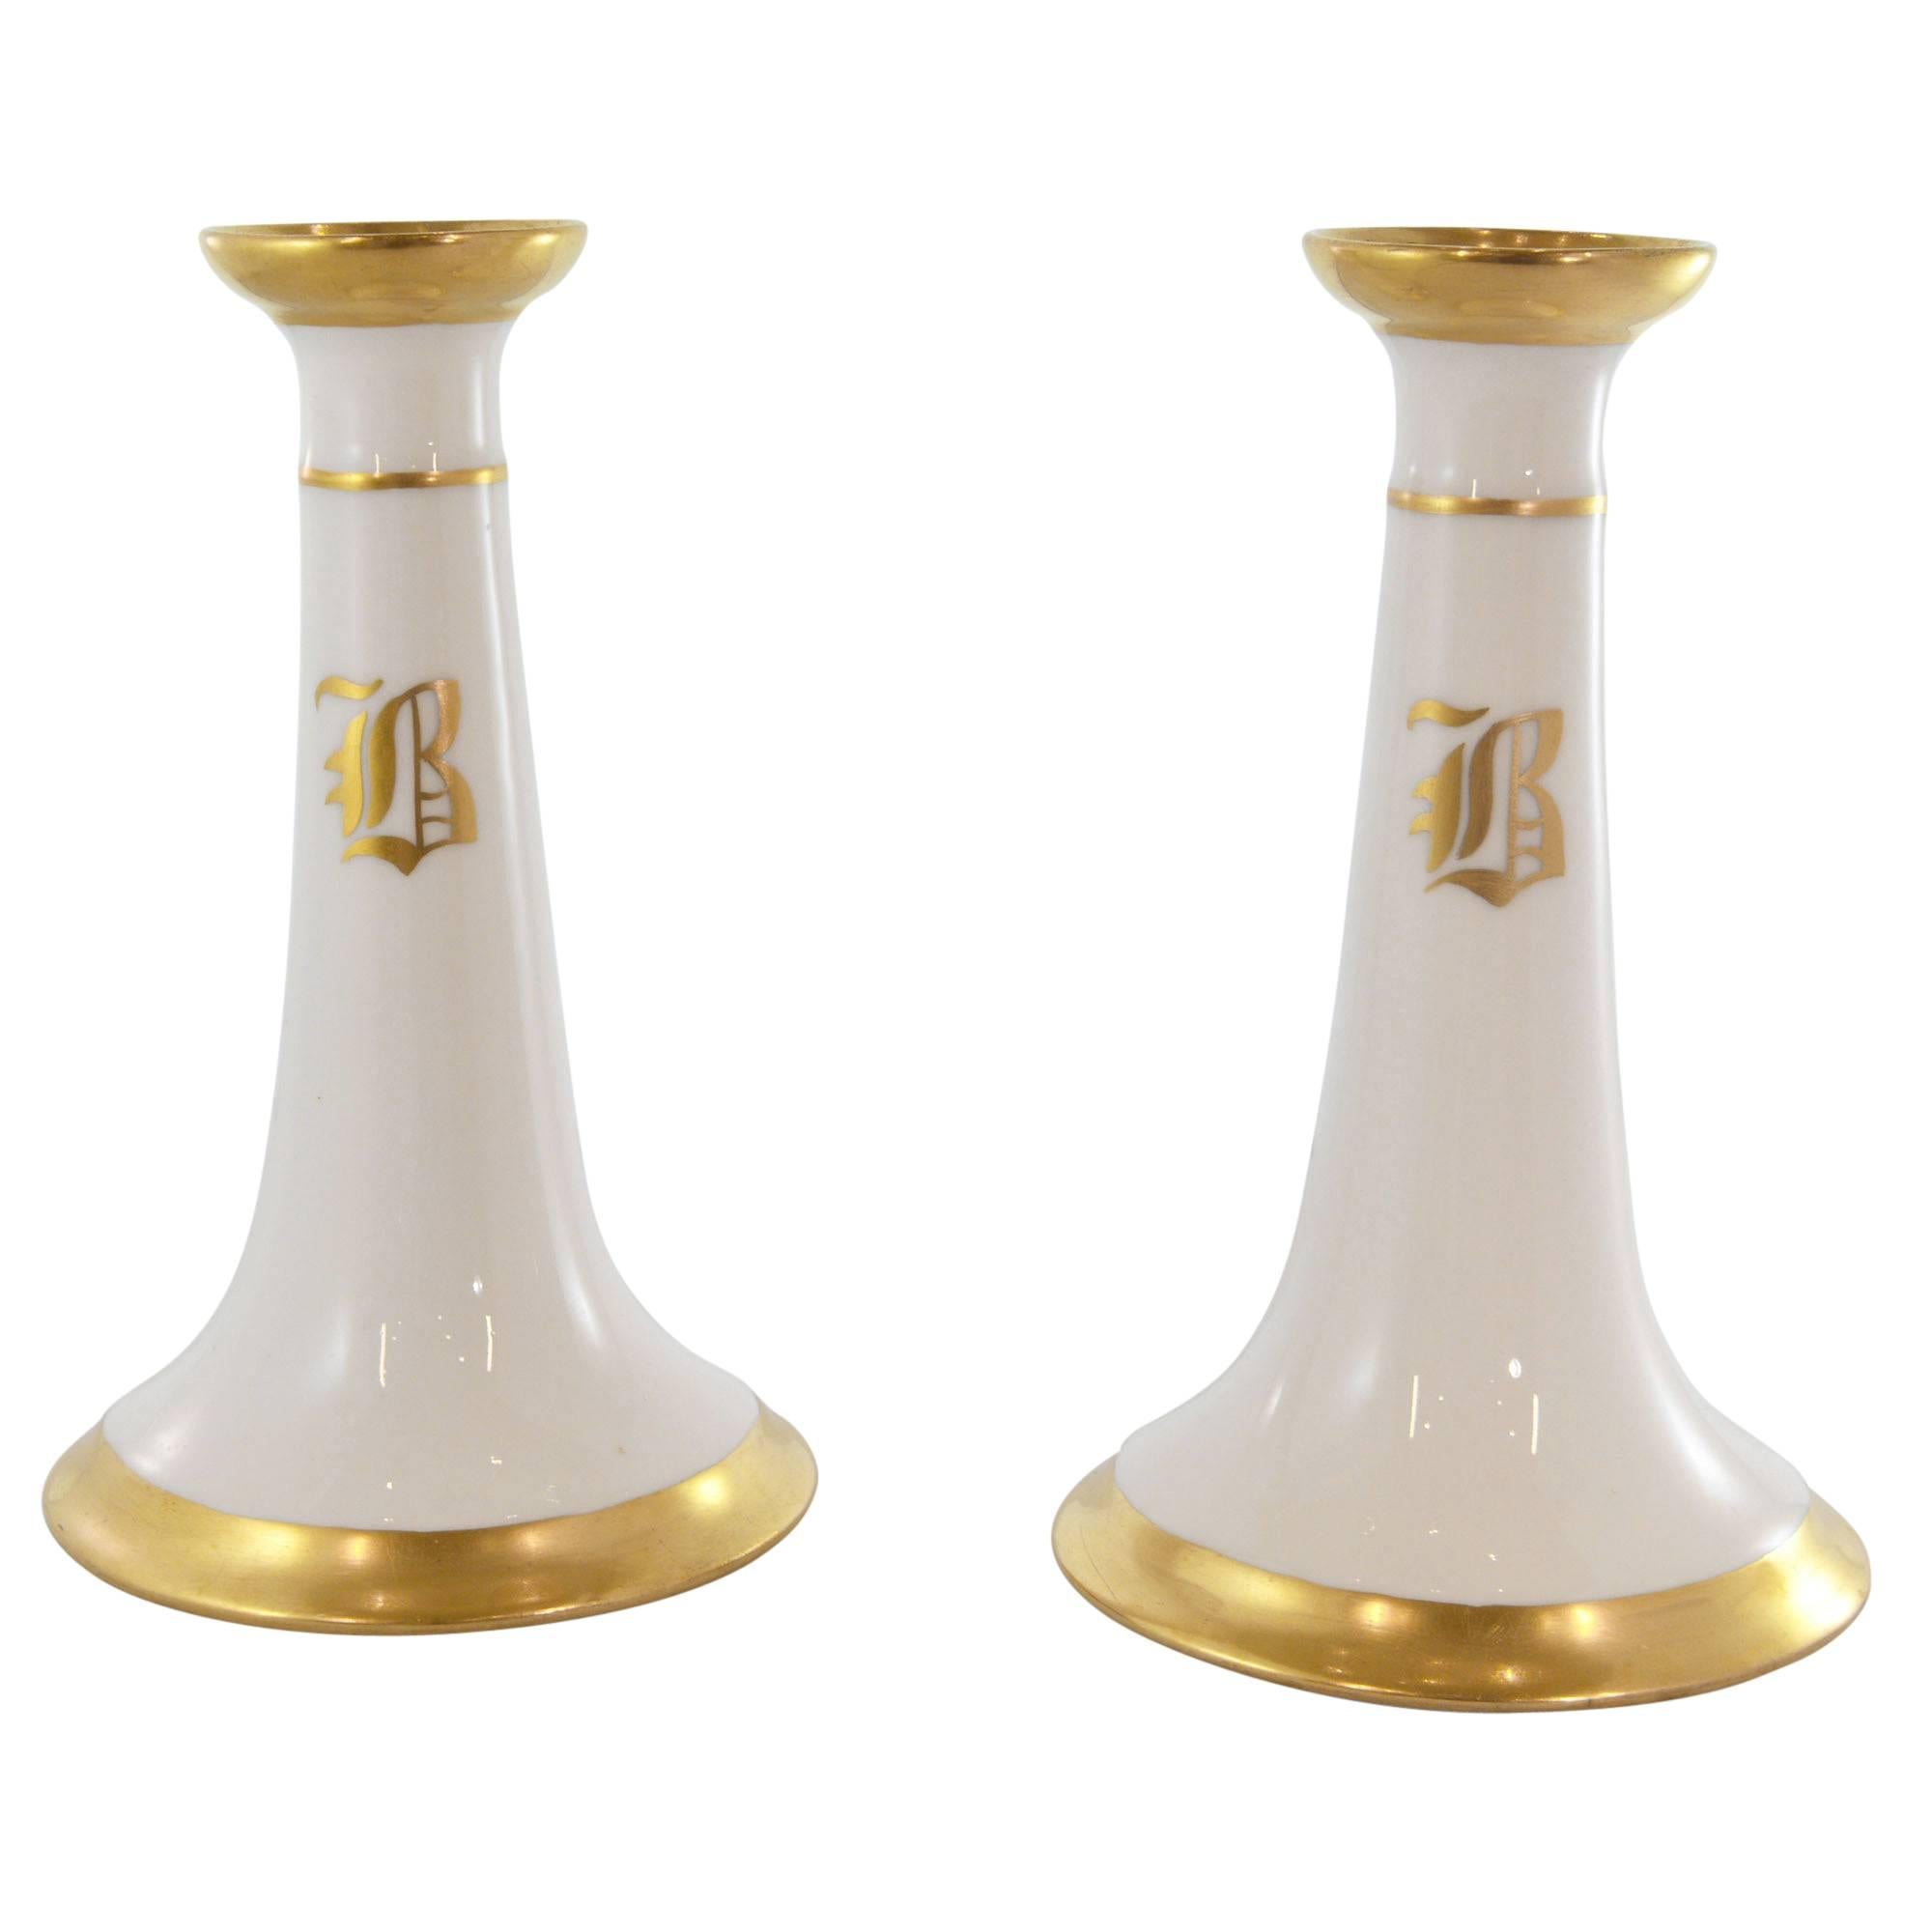 Pair of Antique Signed Limoges Candlesticks